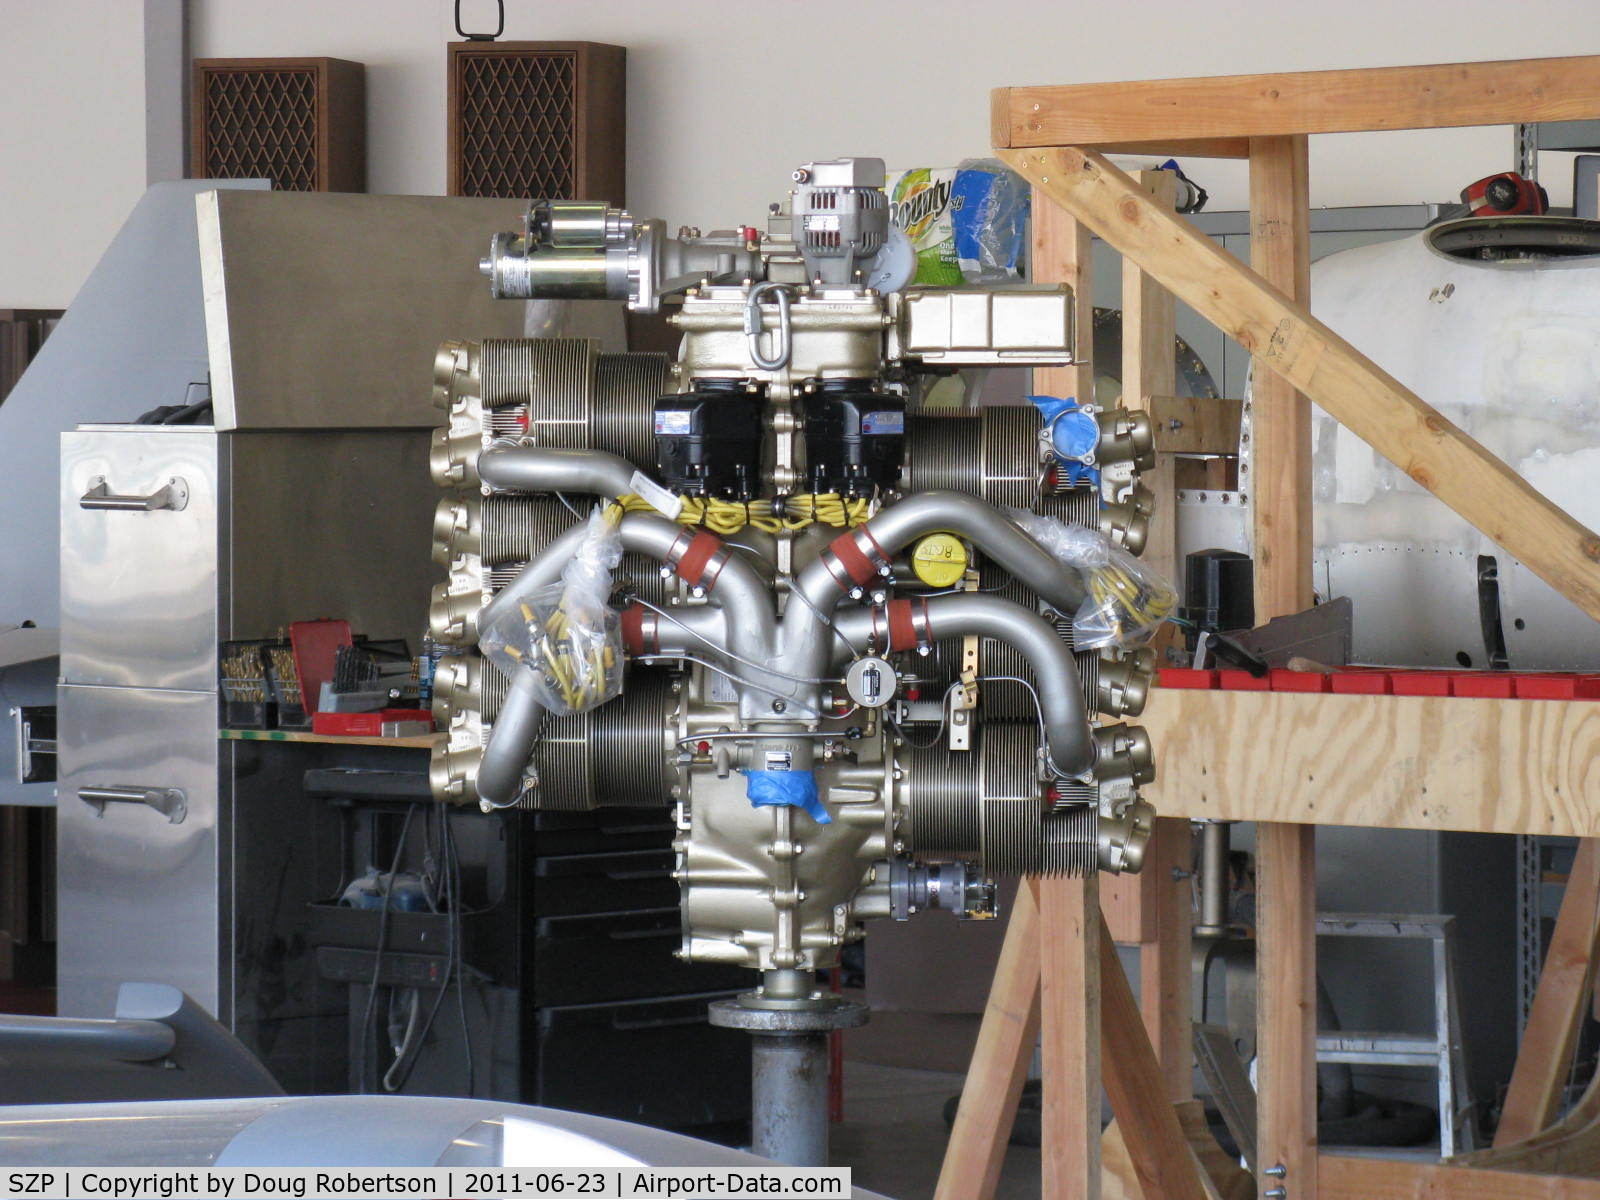 Santa Paula Airport (SZP) - Aviation F/X. Assorted Experimental aircraft, In build. New engine on vertical engine stand. 